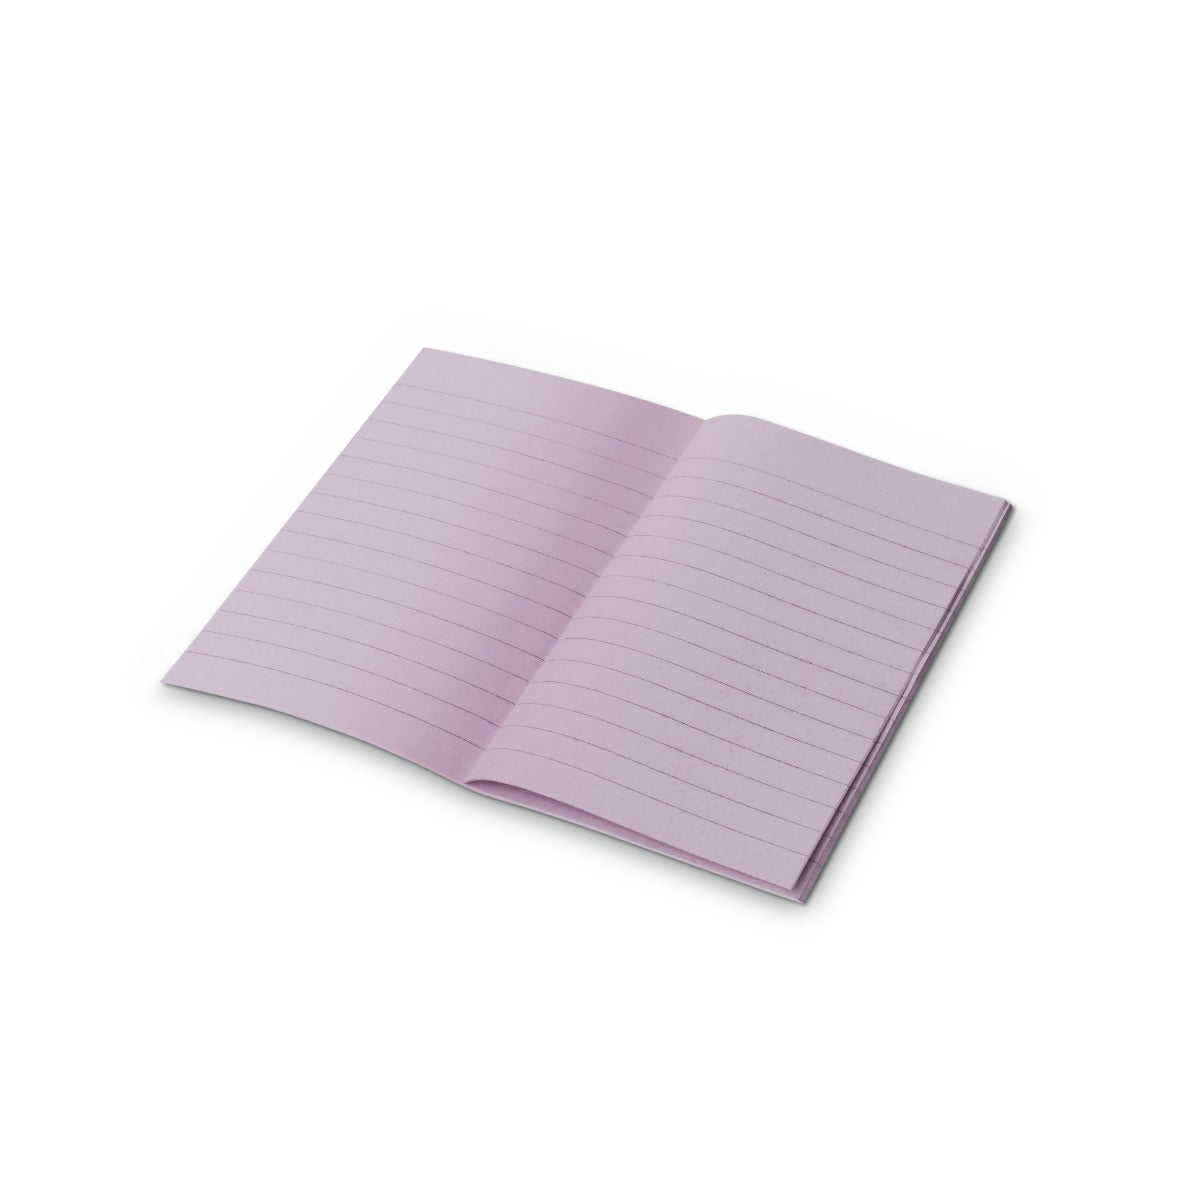 Tinted Spelling Books - 7” x 4½” - 10mm Lined (Yellow Cover)